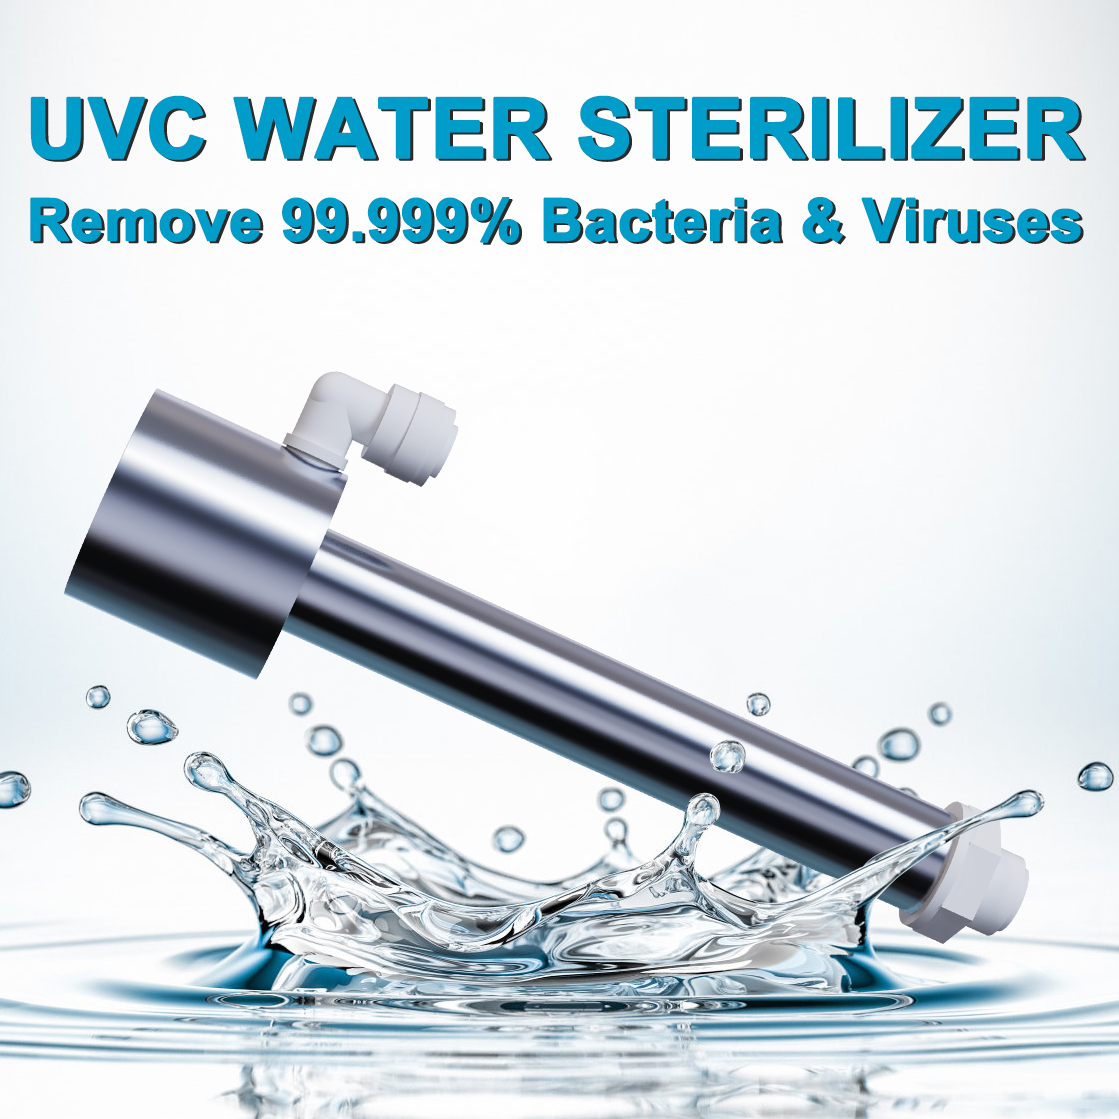 The third generation UVC Disinfection Technology. Custom integrated UVC modules, compact small size, excellent disinfection rate, Low cost, free...